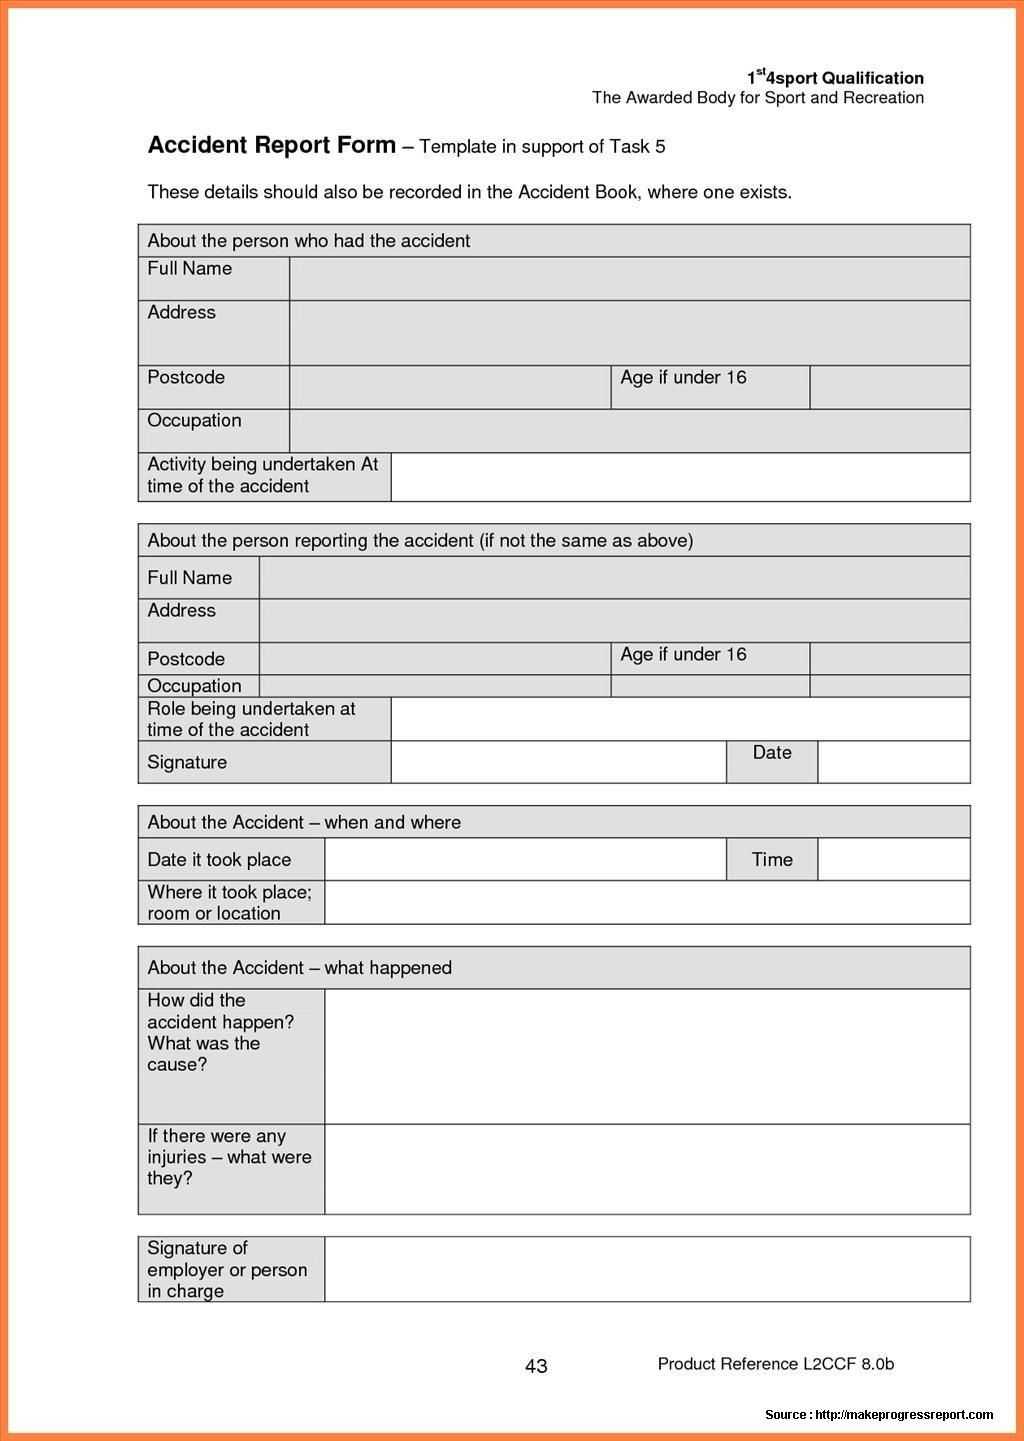 Construction Accident Report Form Sample | Work | Report Inside Technical Support Report Template